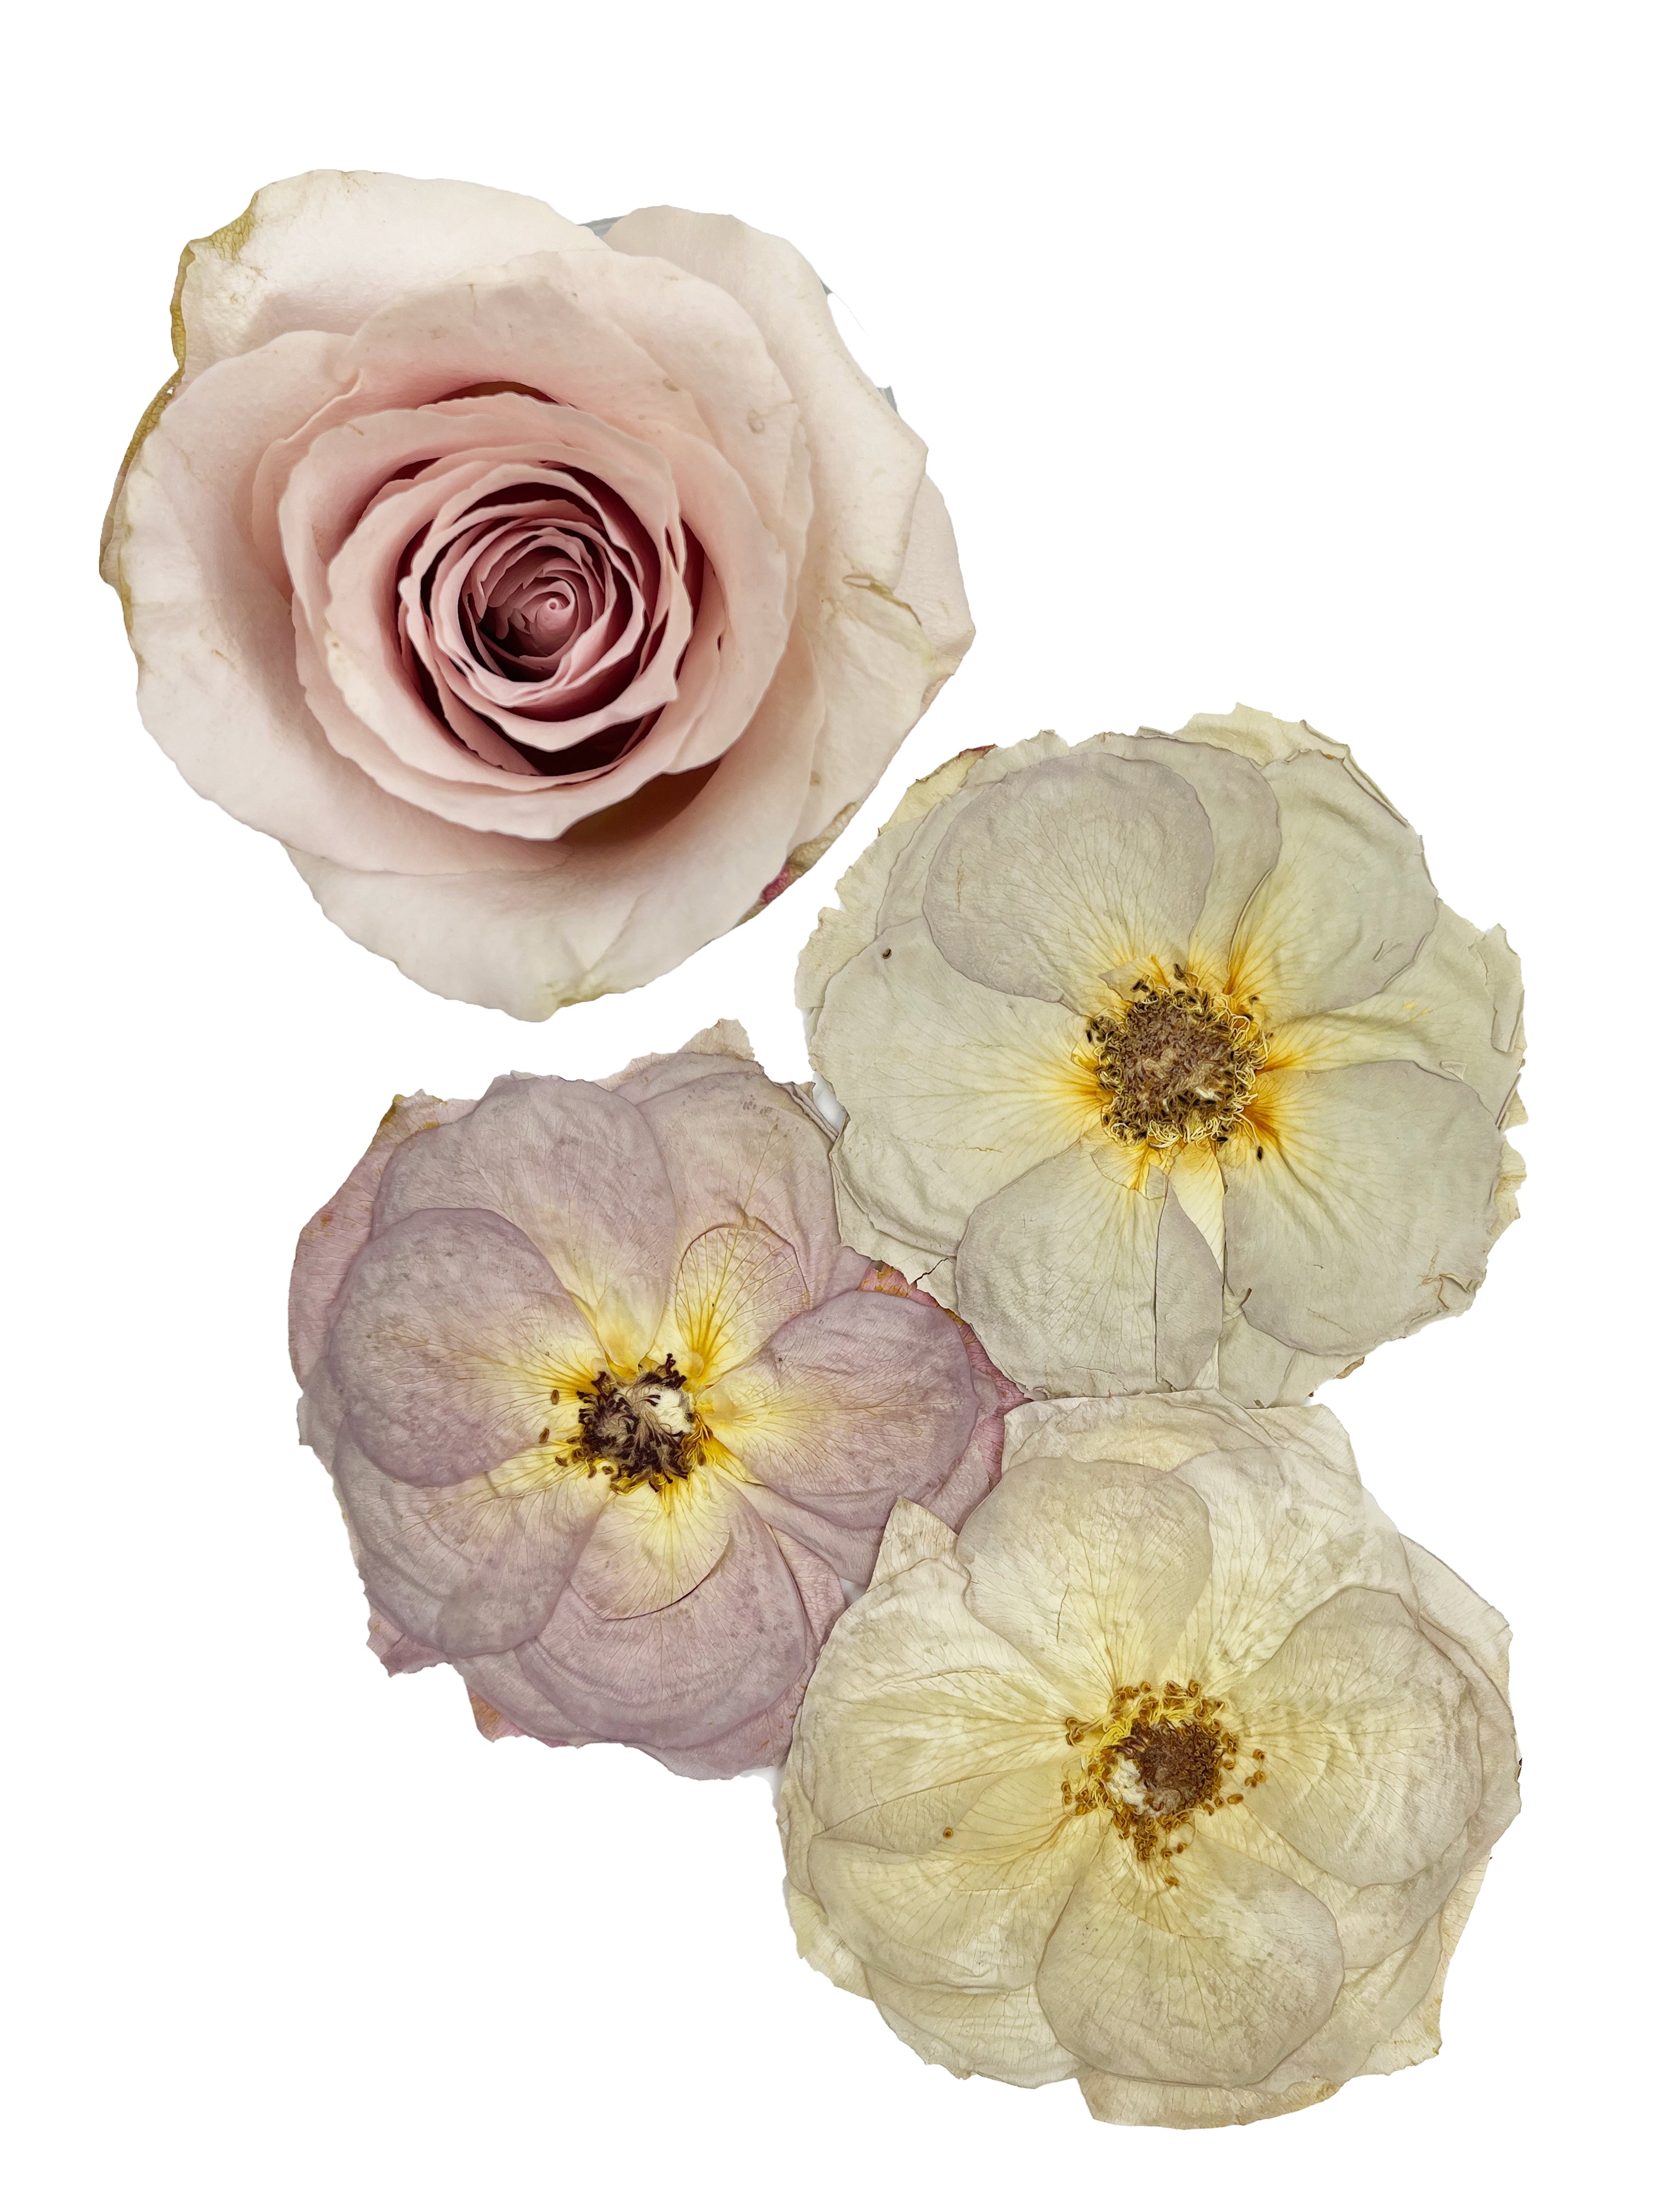 Quicksand roses as a fresh flower and as three pressed versions, showing off the difference in color change, against a white background.